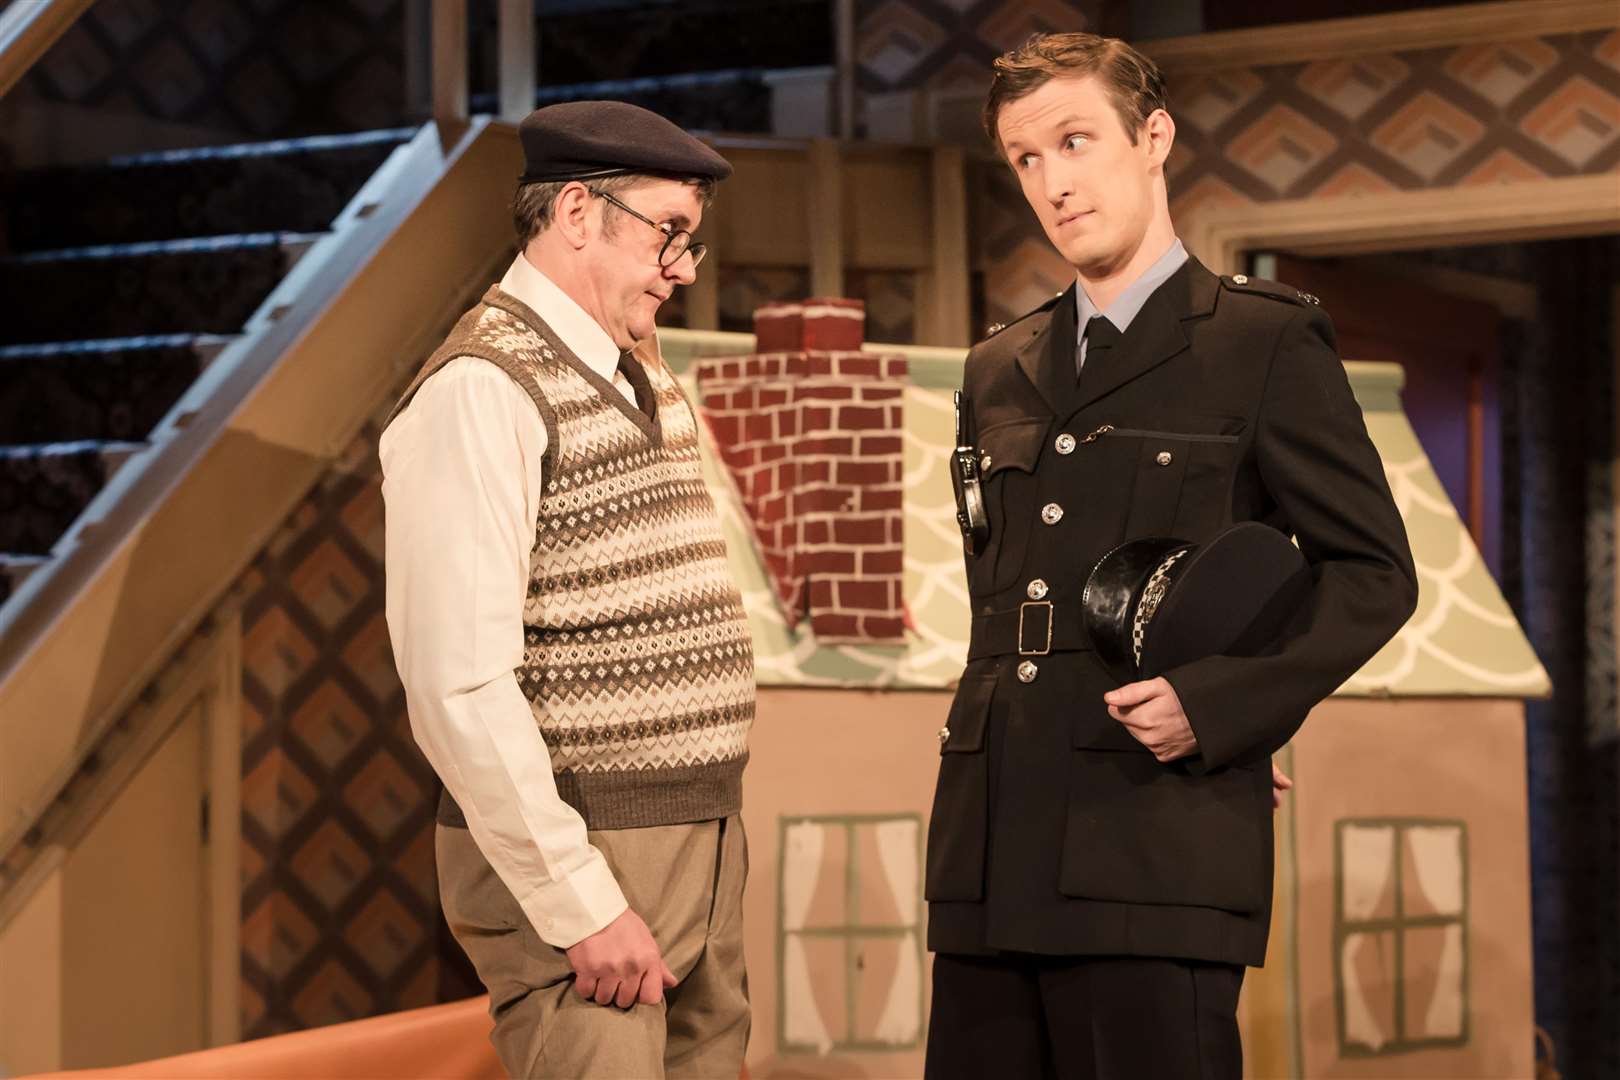 Joe Pasquale as Frank Spencer and Chris Kiely in Some Mothers Do 'Ave 'Em